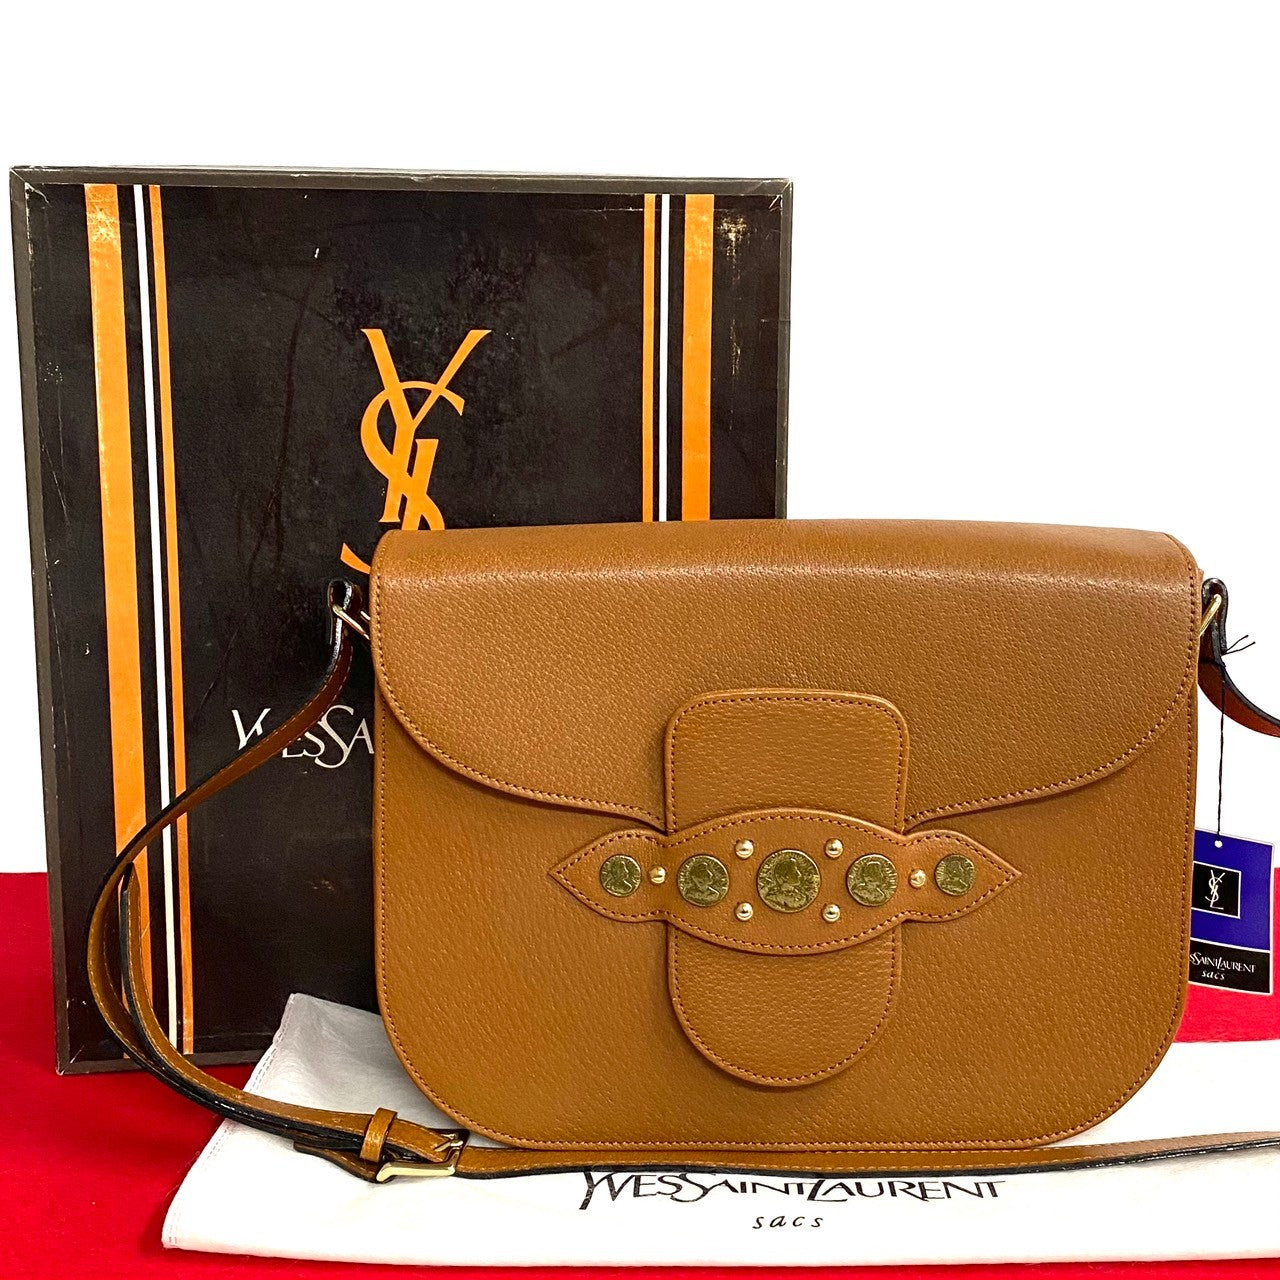 Yves Saint Laurent Leather Crossbody Bag  Leather Crossbody Bag in Excellent condition